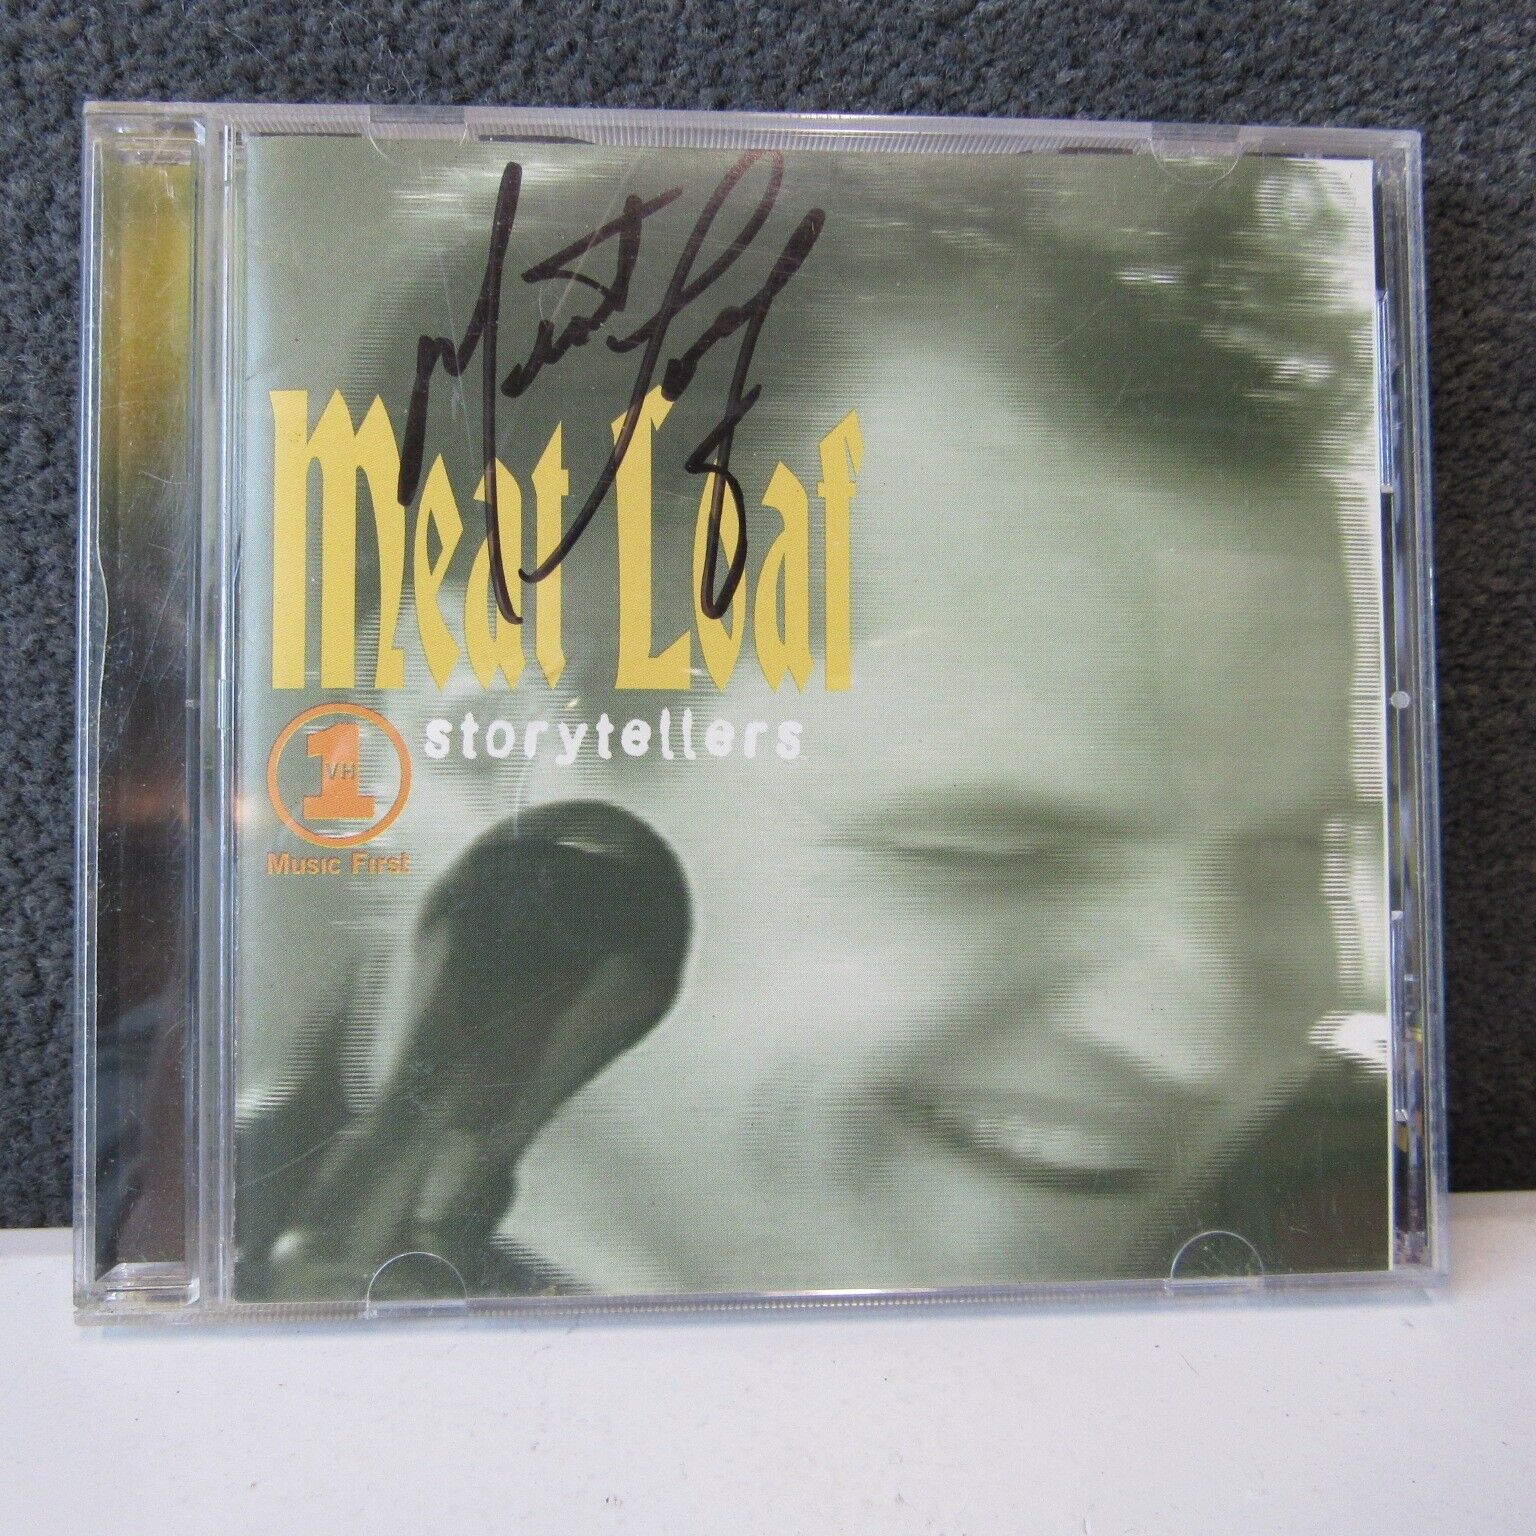 Autographed Meat Loaf VH1 Storytellers Audio Music CD, 1999 Album